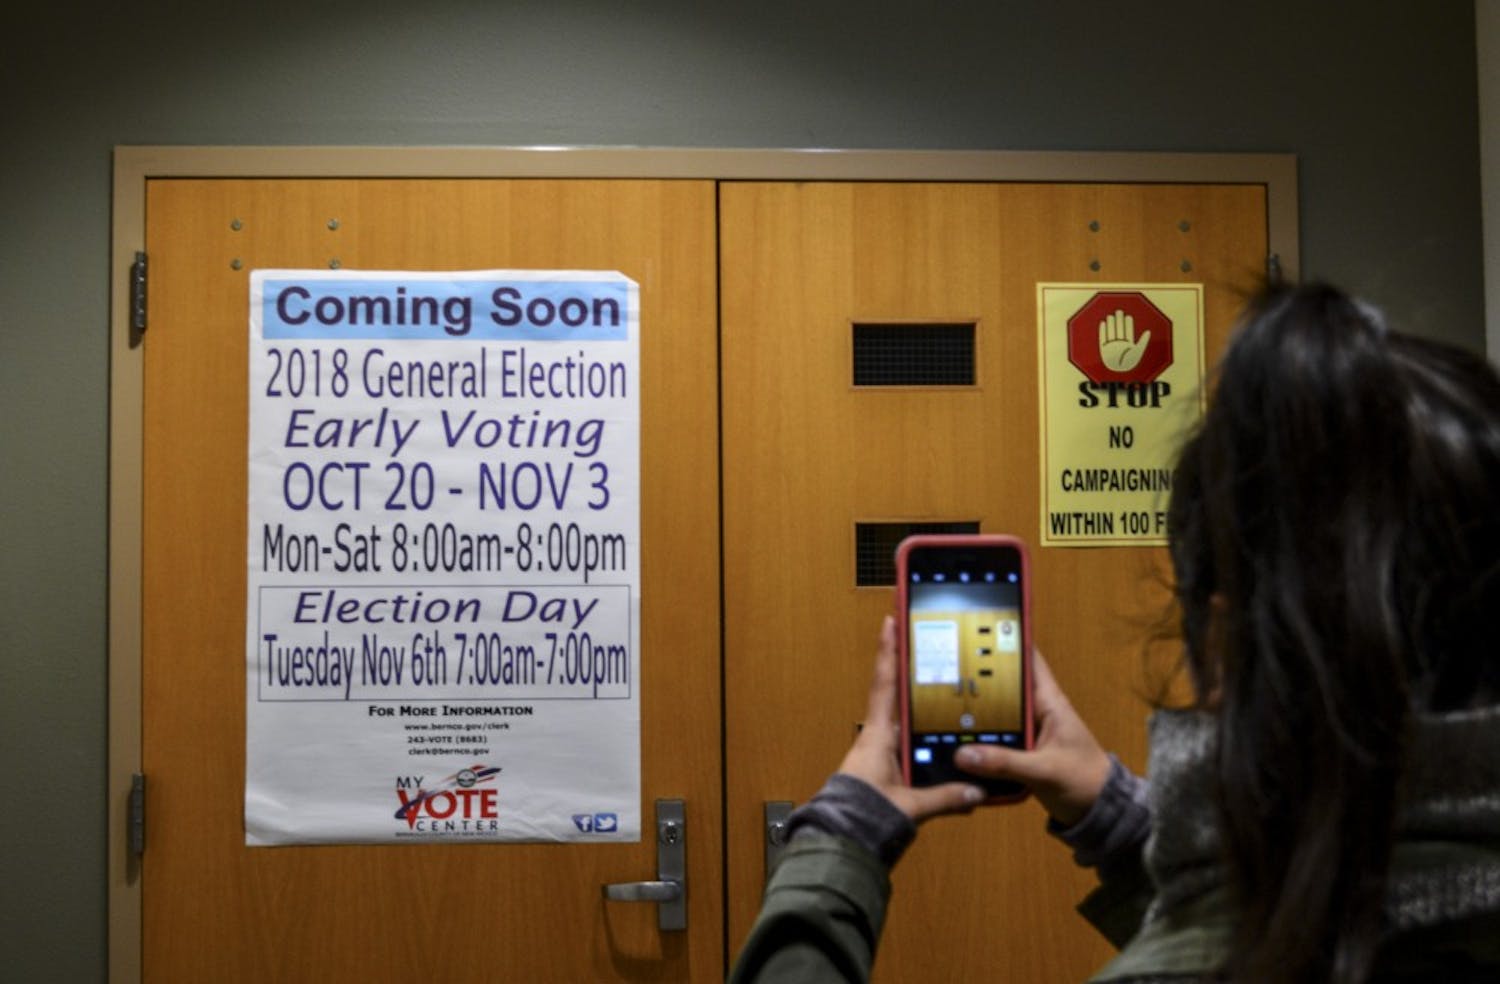 A student takes pictures of a sign regarding UNM’s early voting center.